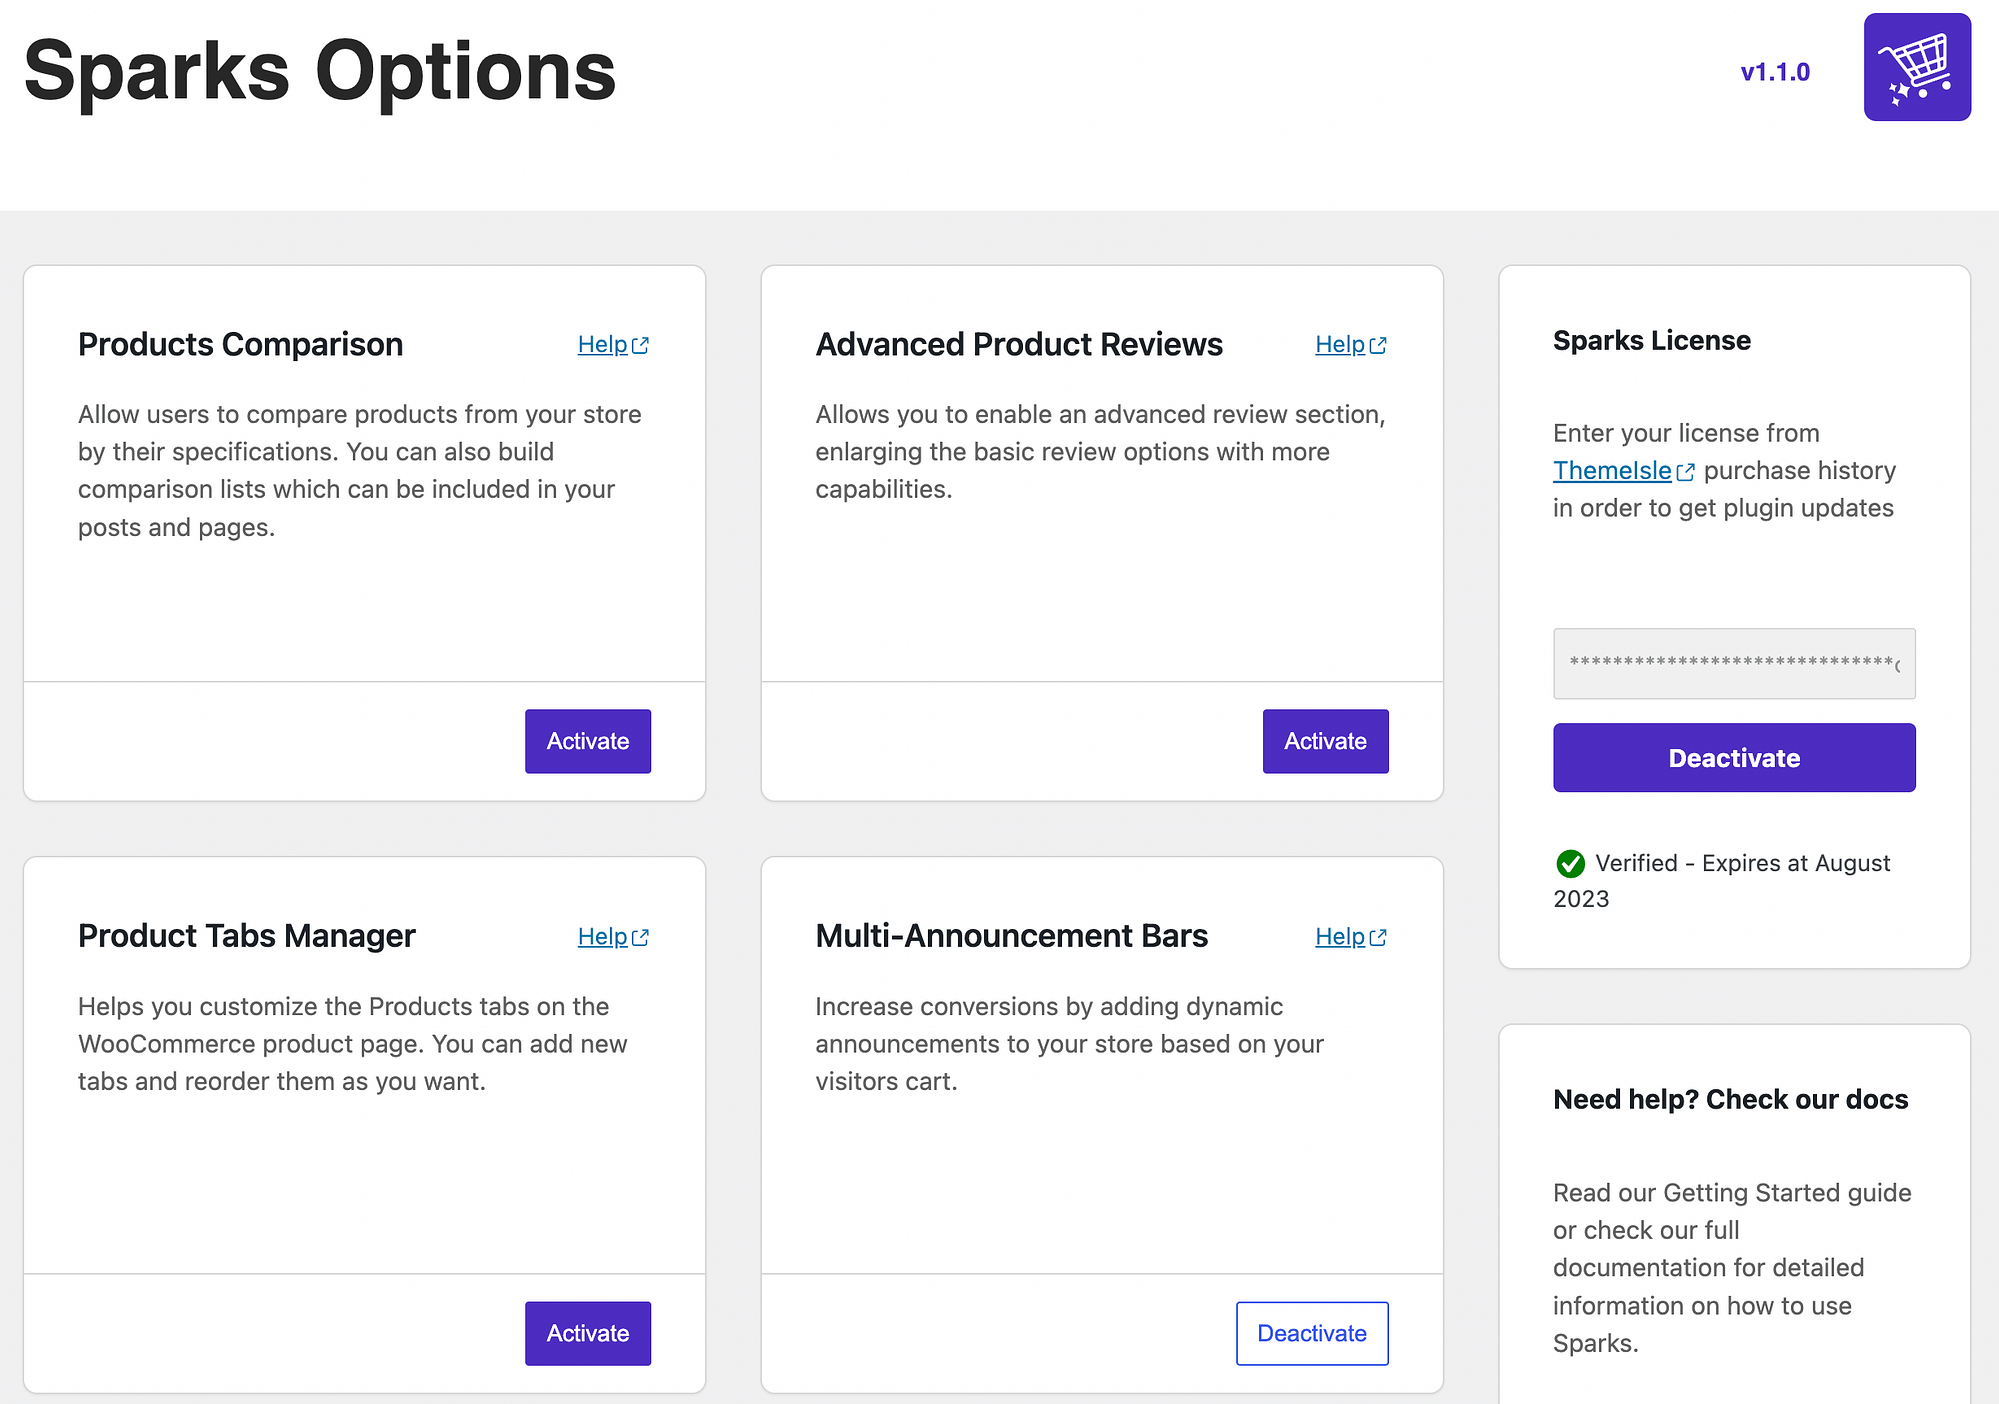 Activate the Products Comparison module in Sparks for WooCommerce